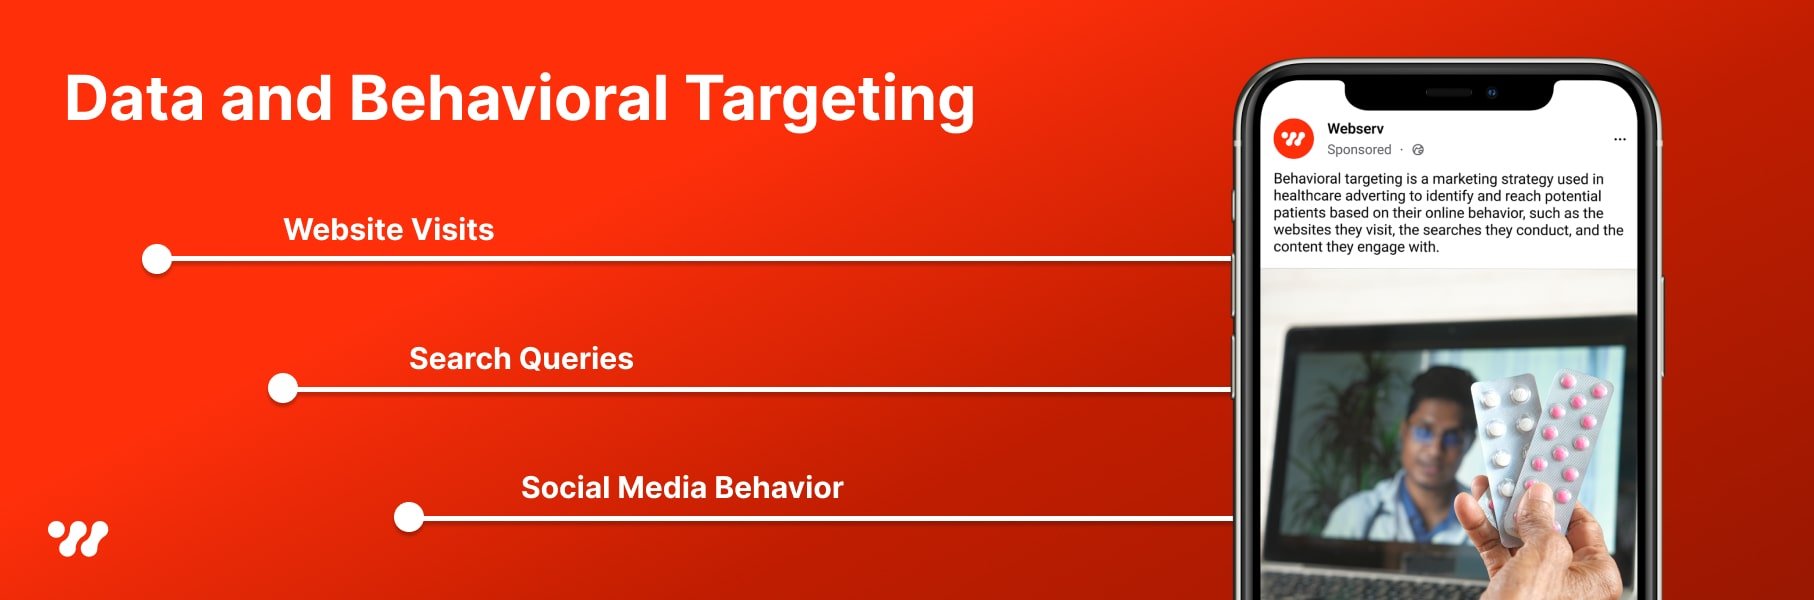 data and behavioral targeting examples. Targeting and audience segmentation.